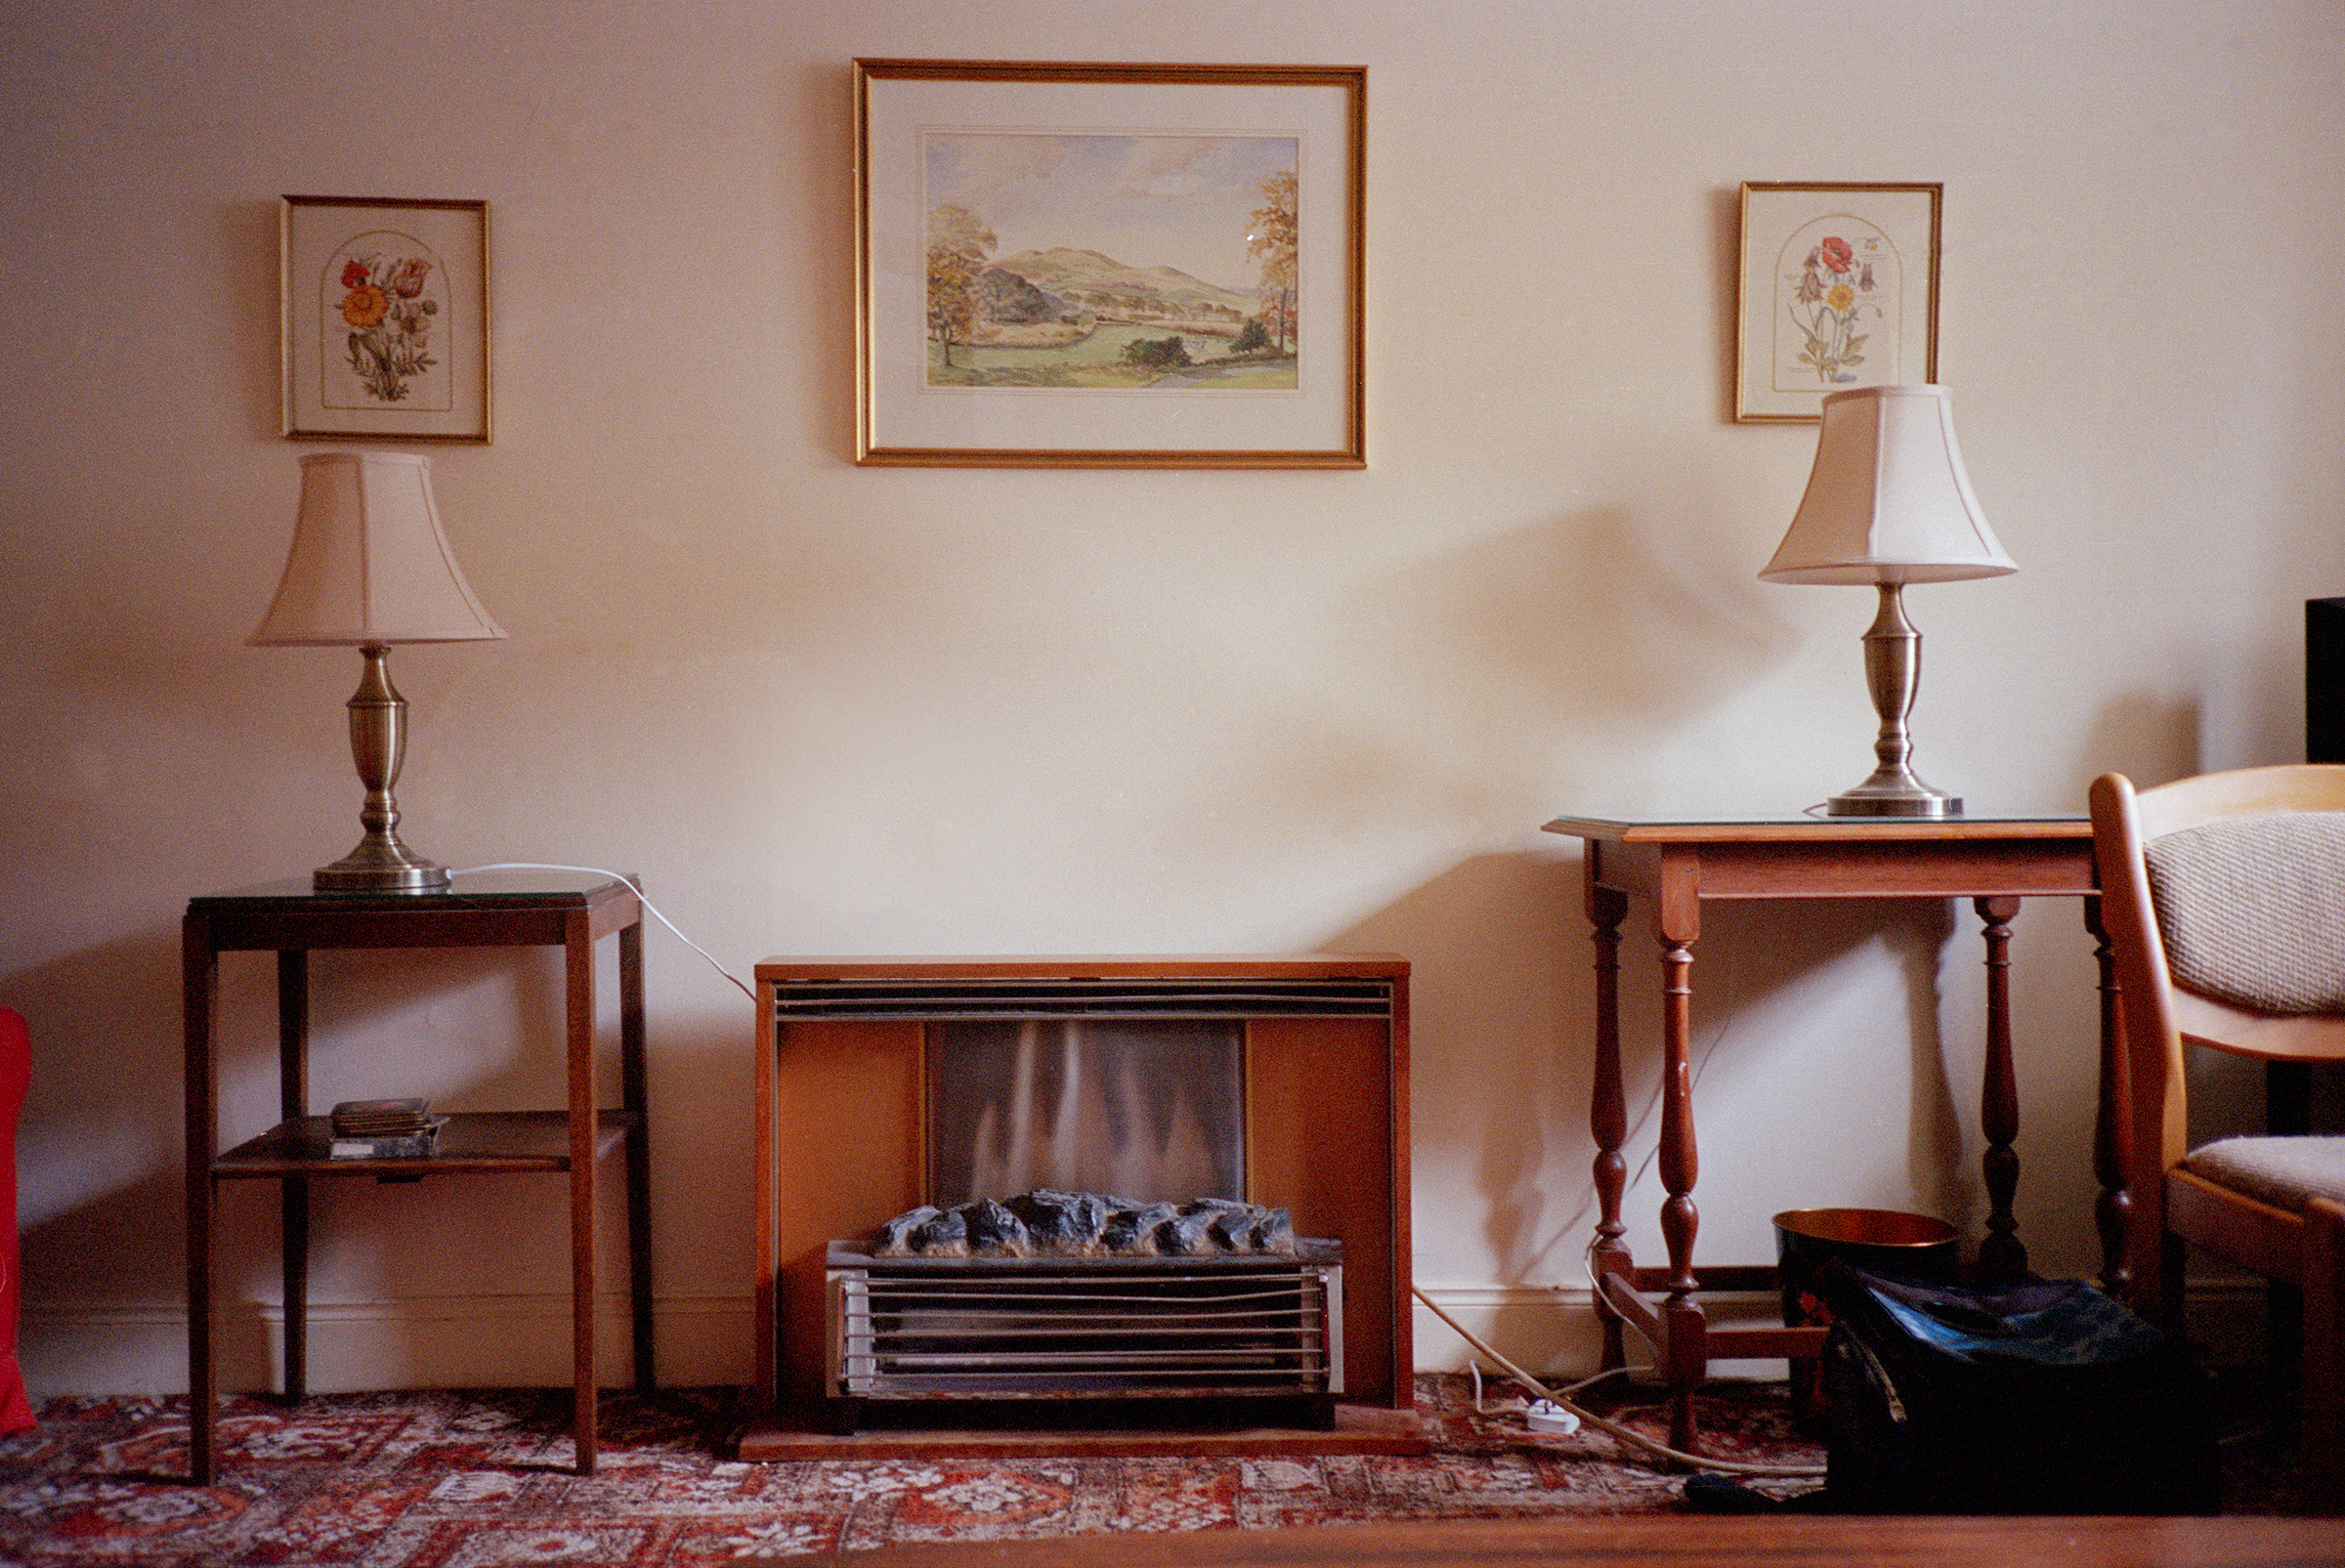 Plug-in Fireplace, St Andrews (2014)